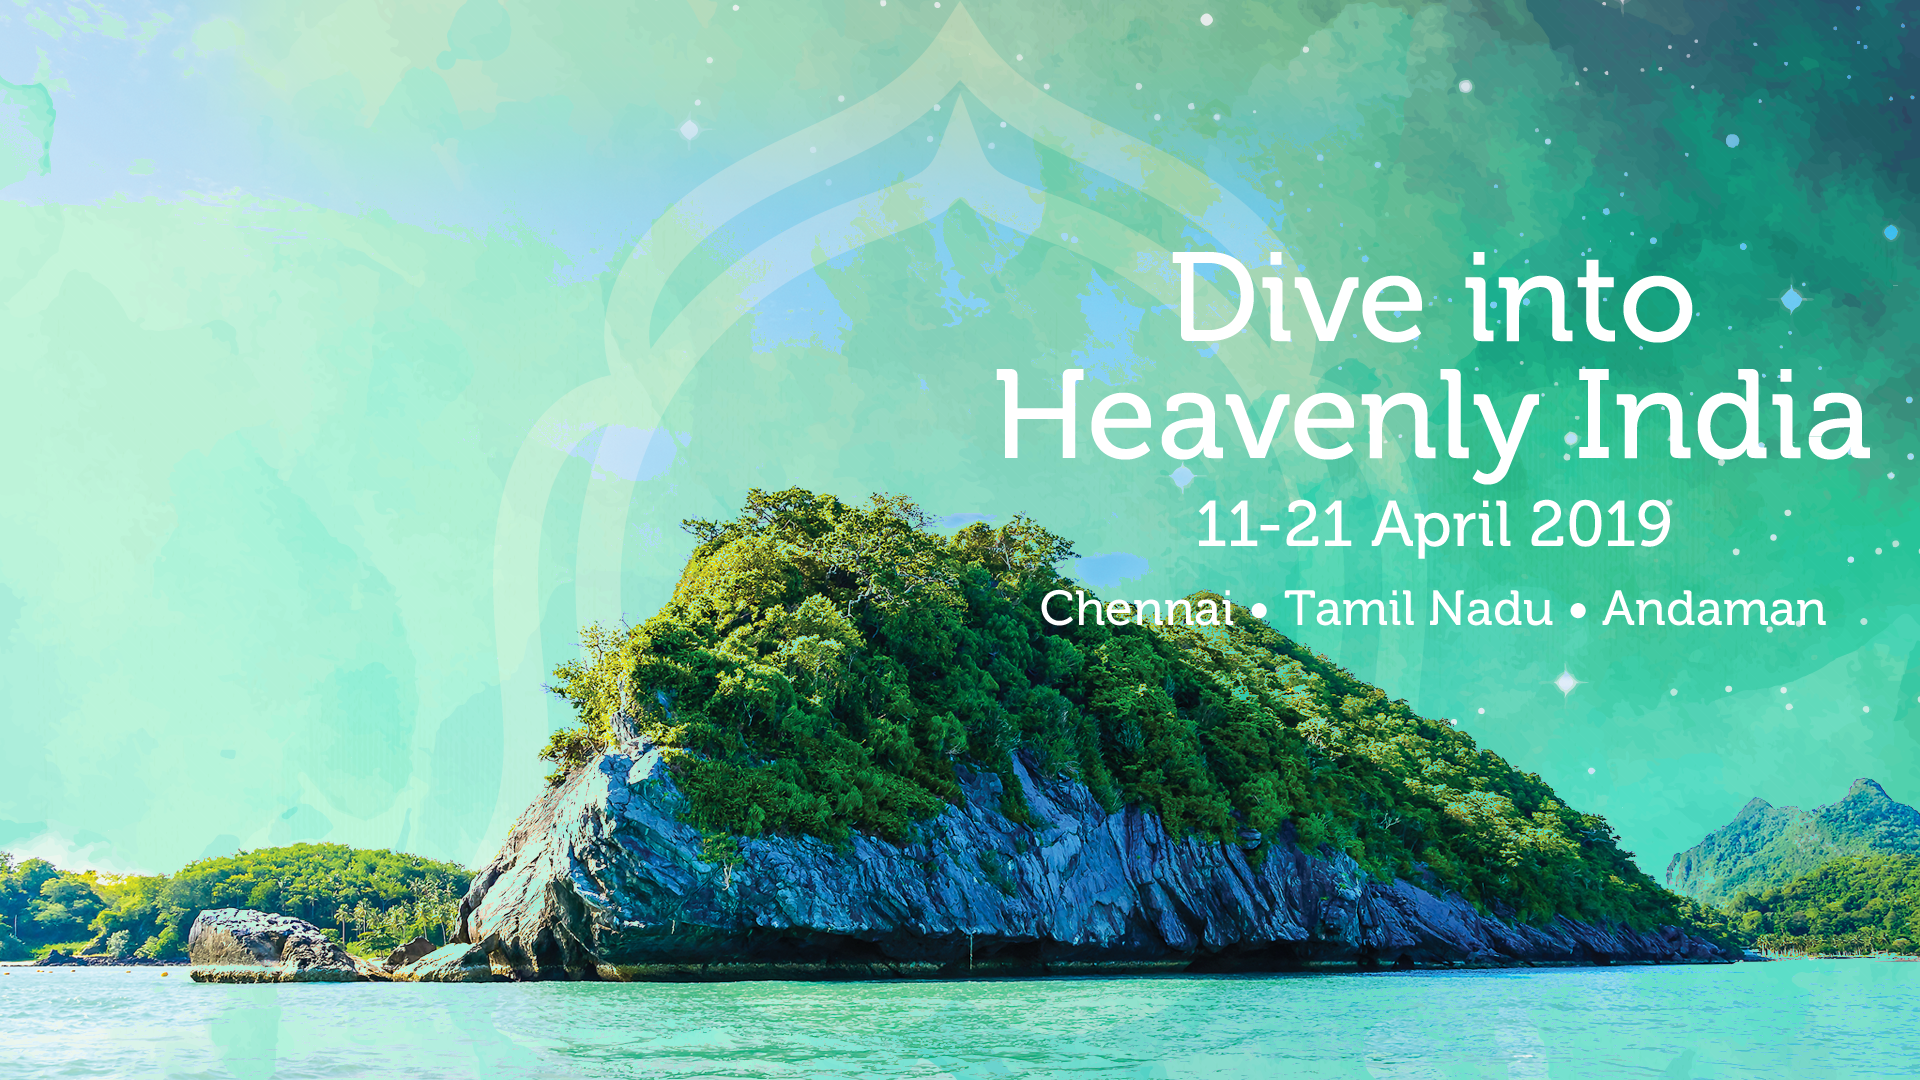 Dive into Heavenly India